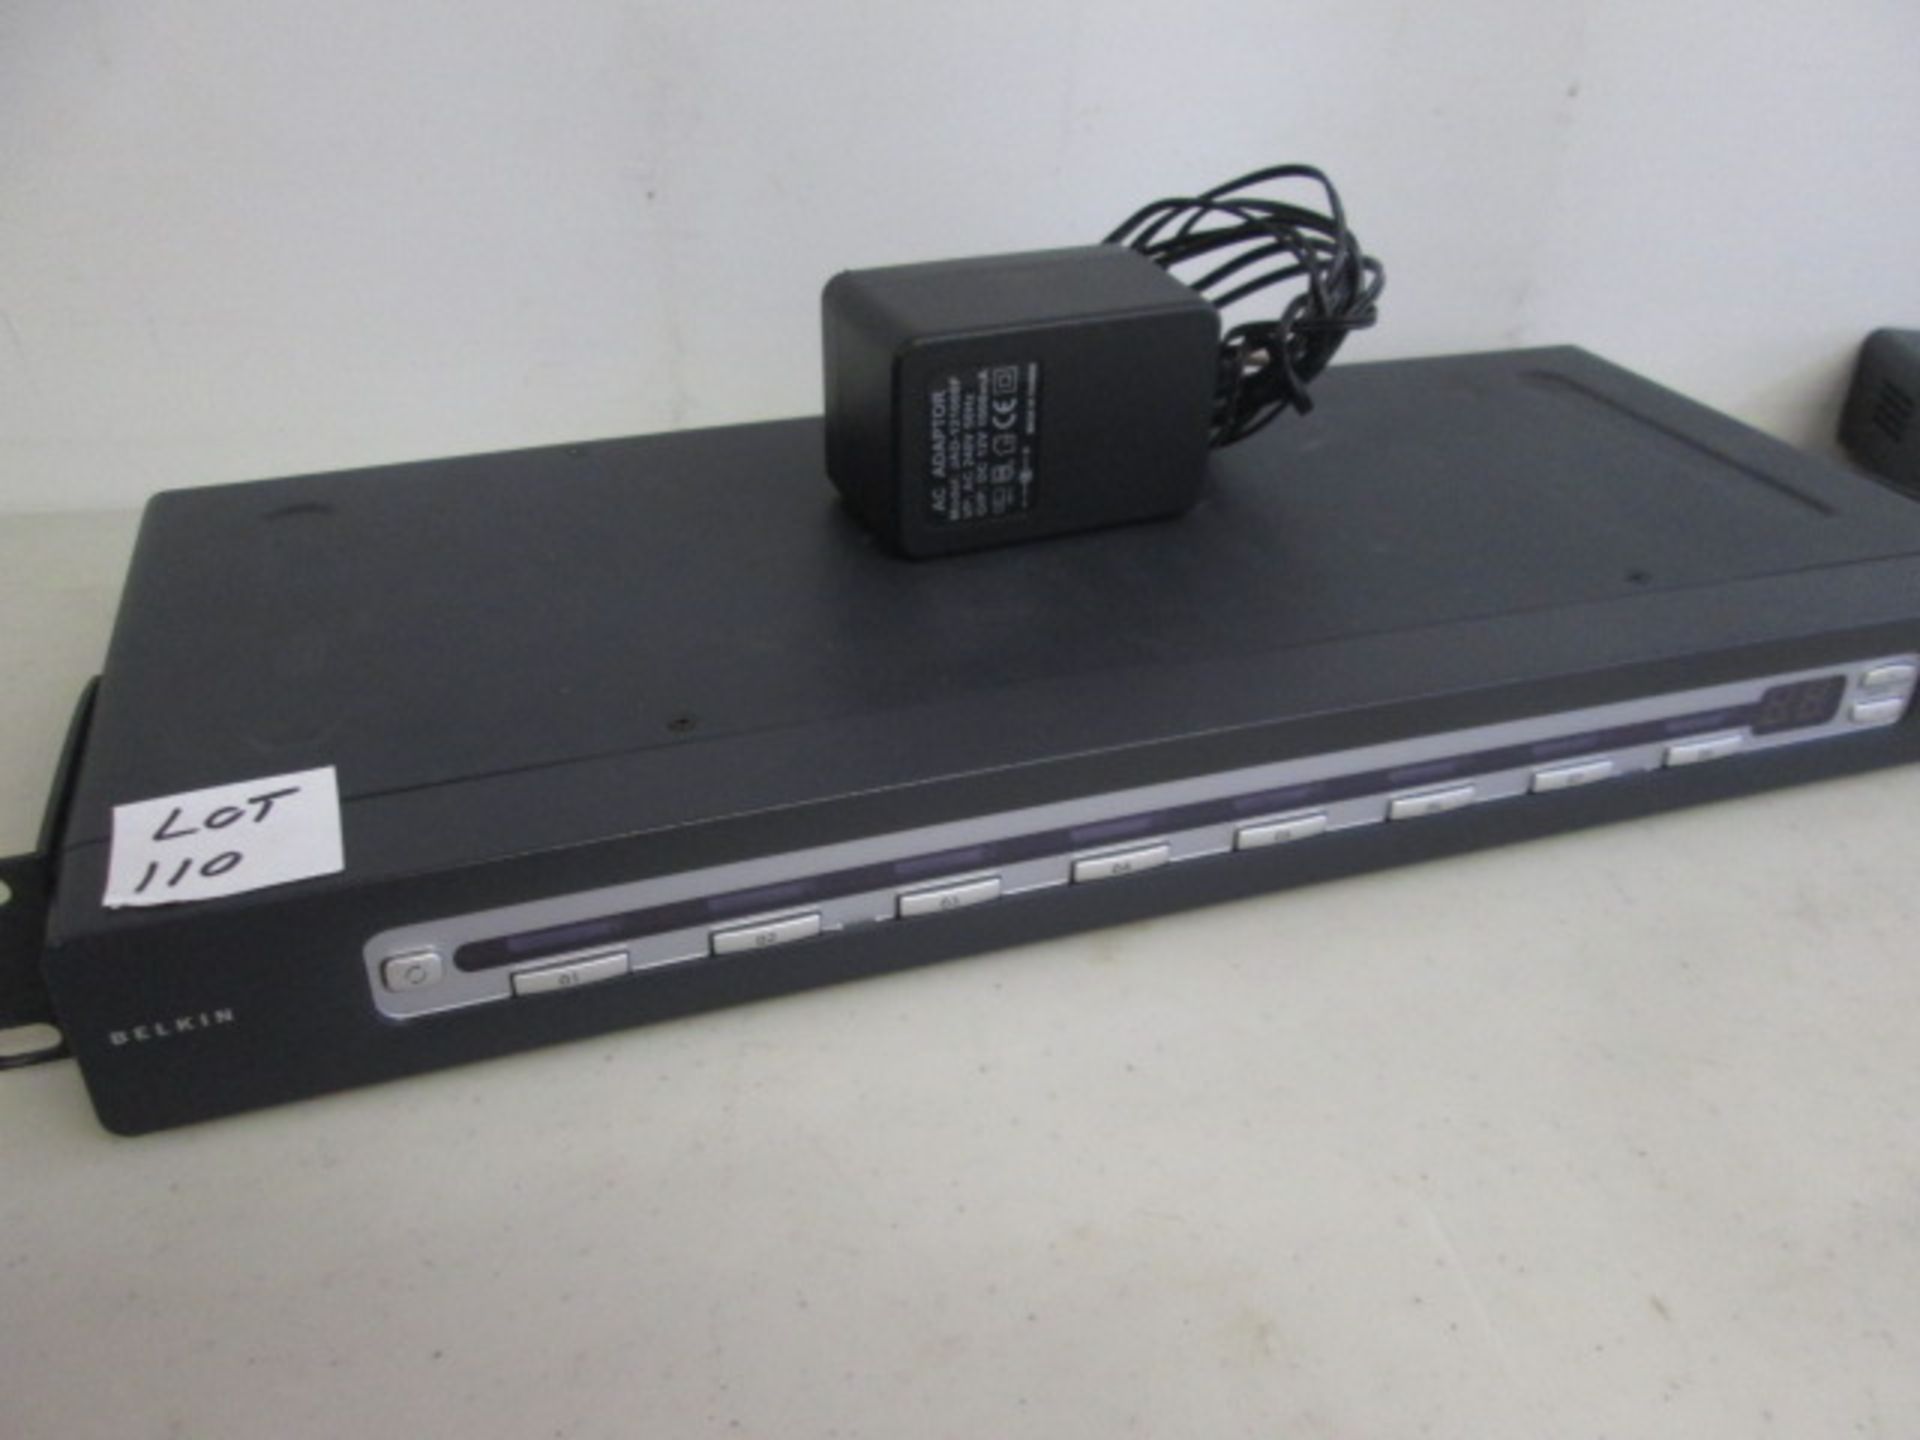 2 x Belkin Omni View Pro 2, 8 Port KVM Switch, Model FIDA108T. Comes with Power Supply - Image 2 of 4